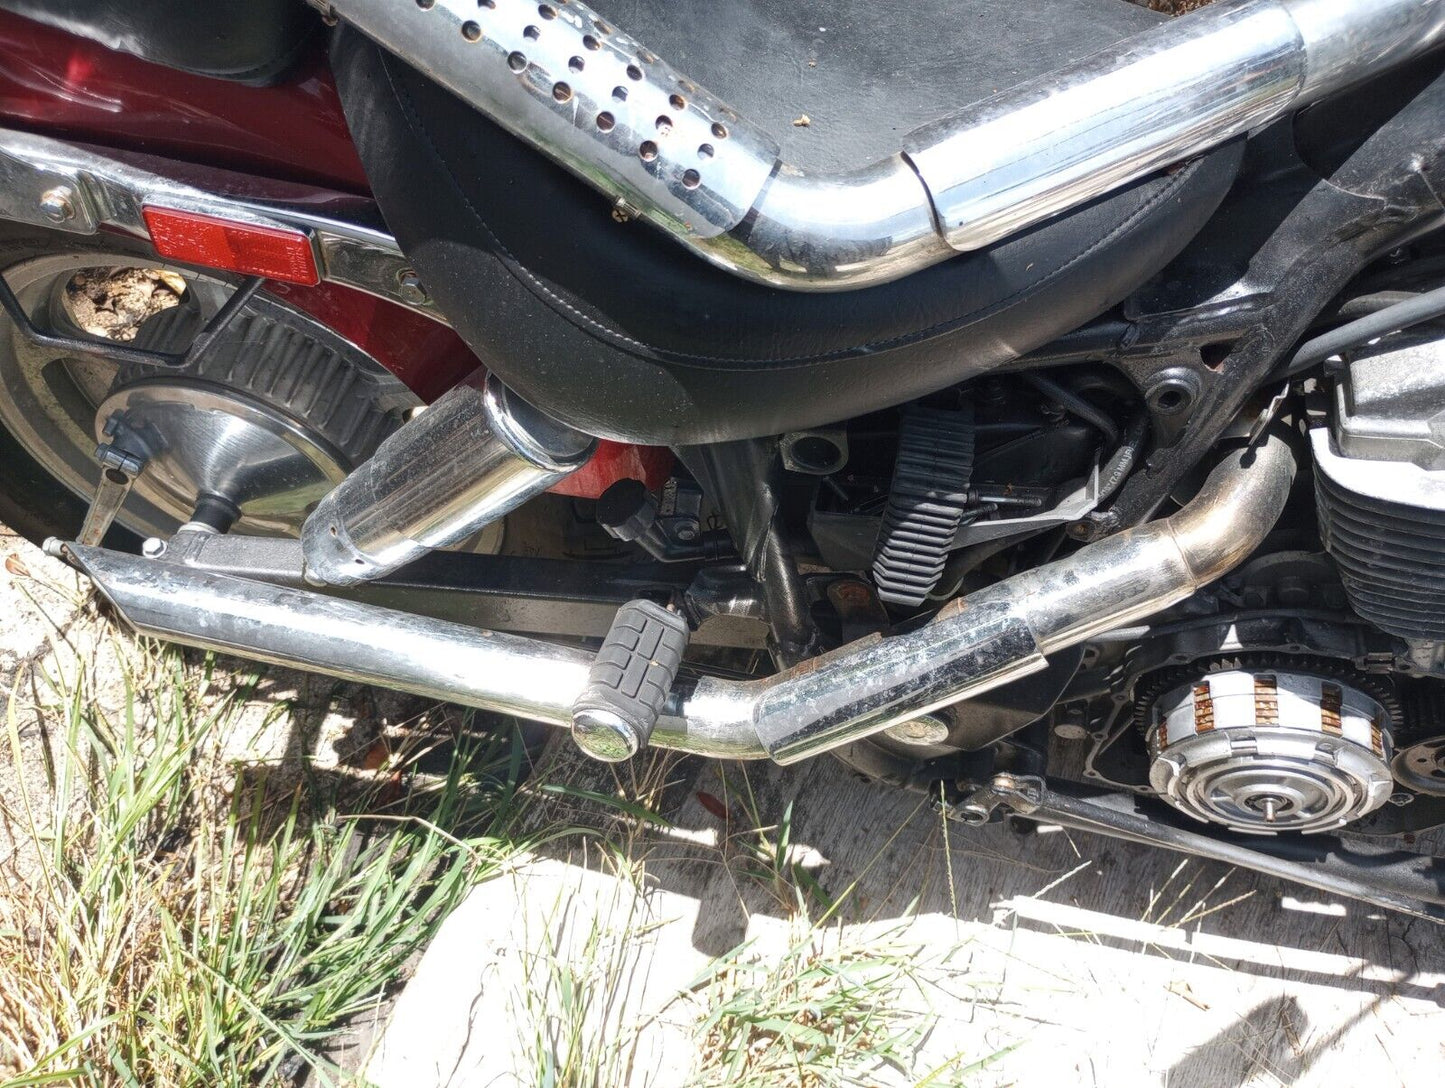 1988 Honda VT1100 Shadow 1100 Exhaust Complete as shown Drag Pipes VT